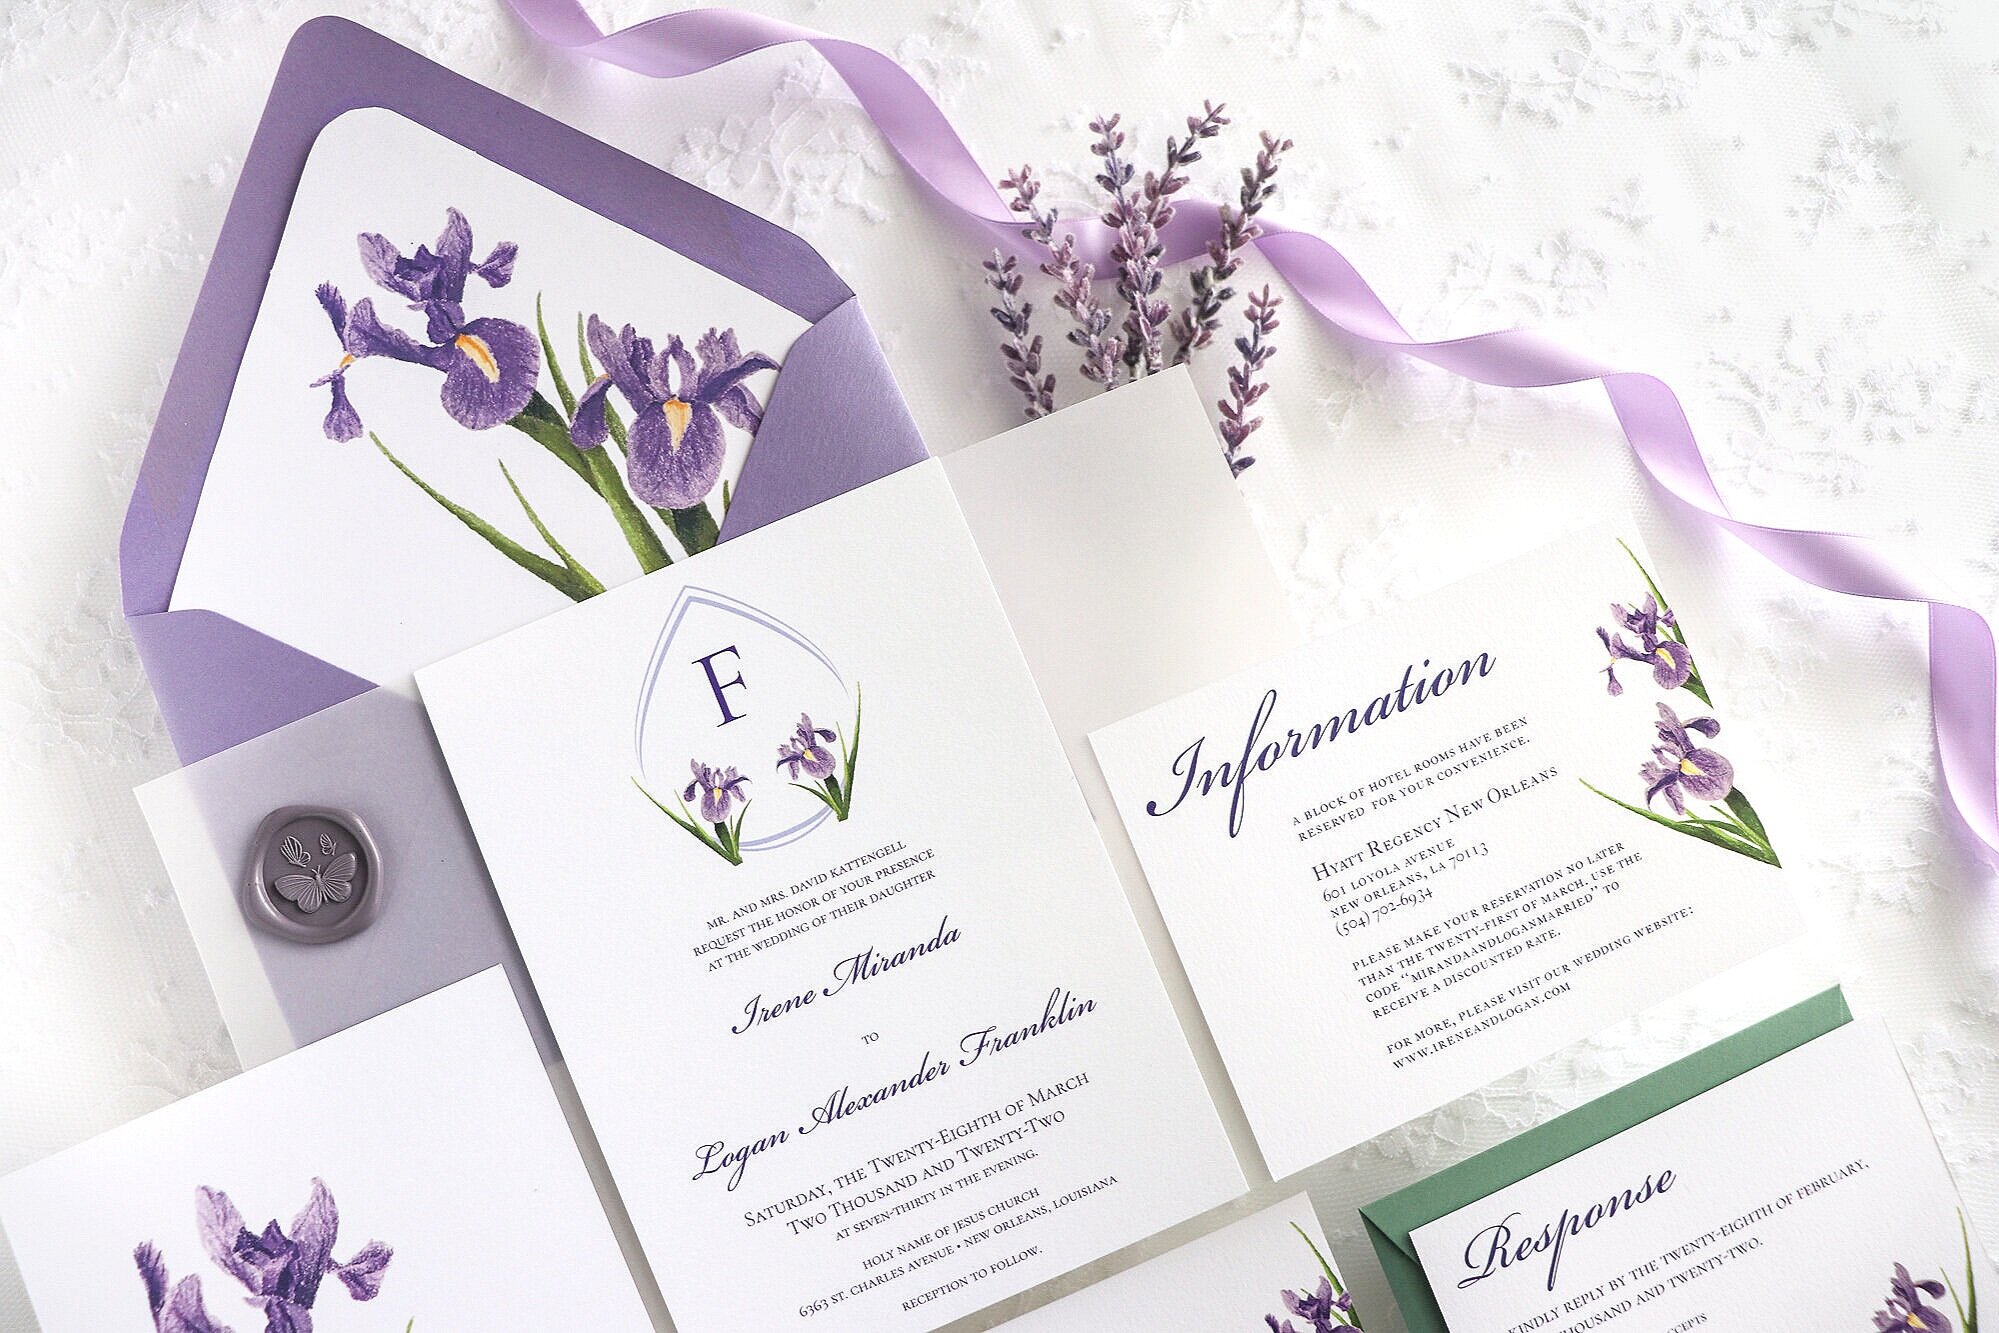 50 PERSONALISED SAVE THE DATE WEDDING CARDS AND WHITE ENVELOPES purple butterfly 